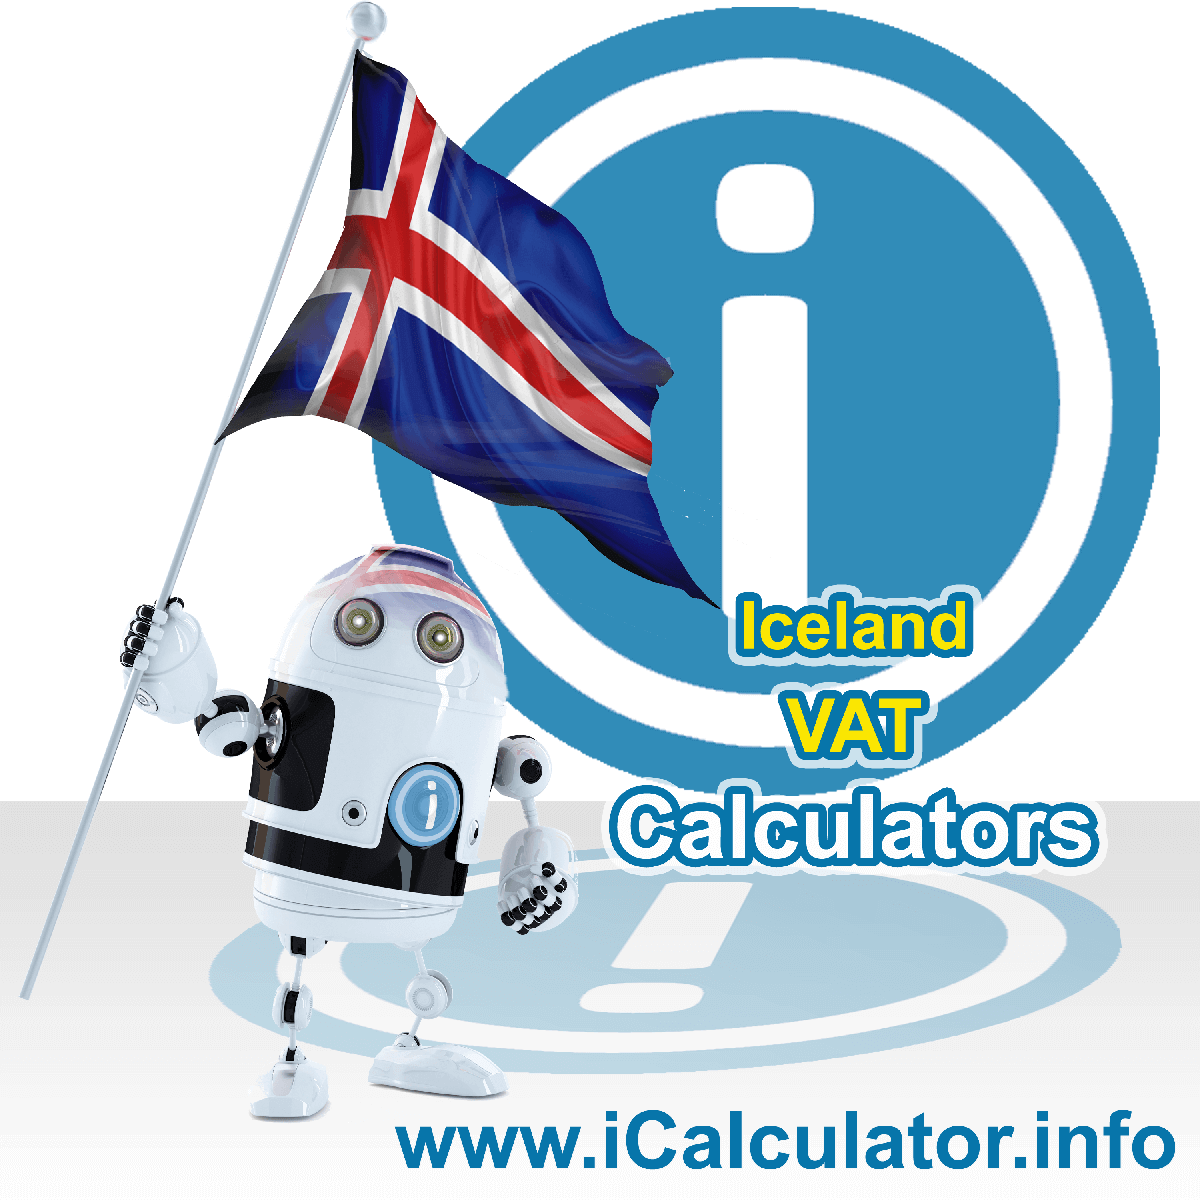 Iceland VAT Calculator. This image shows the Iceland flag and information relating to the VAT formula used for calculating Value Added Tax in Iceland using the Iceland VAT Calculator in 2023